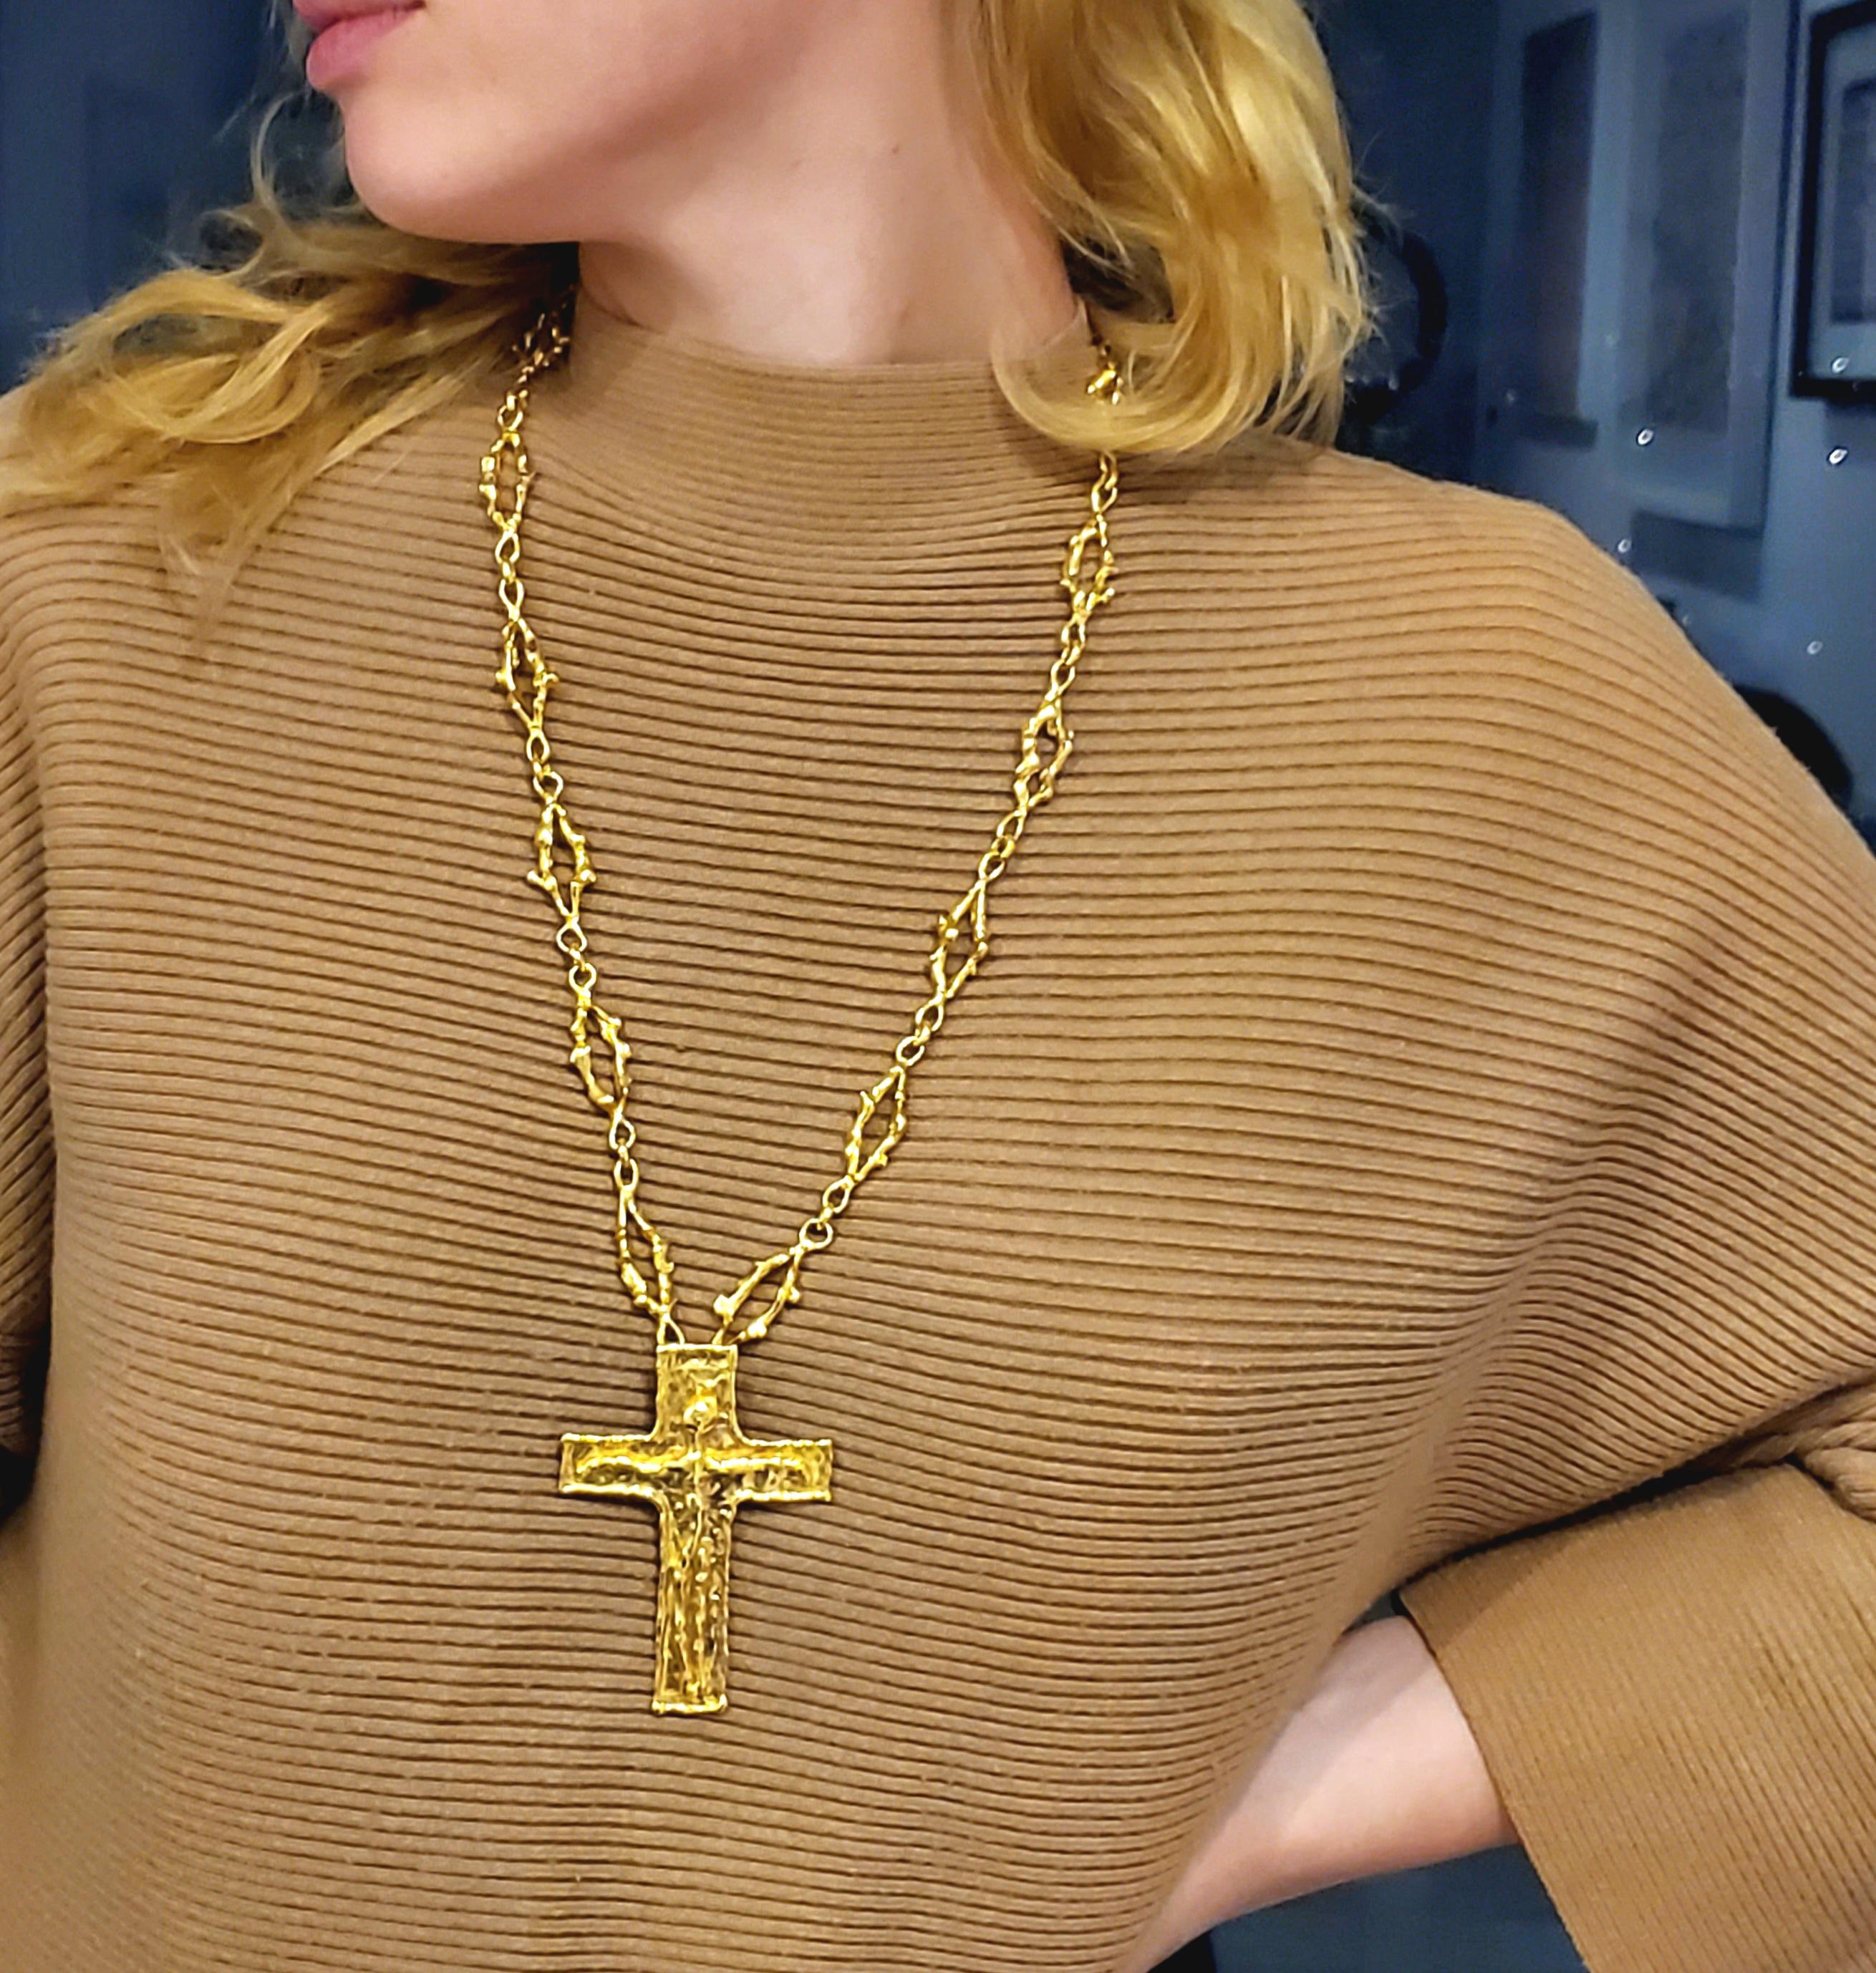 Sculptural crucifix designed by Jean Mahie.

A beautiful piece of wearable art, created in Paris France by the artist, sculptor and goldsmith Jean Mahie, back in the late 1970's. This rare vintage sculptural cross pendant was carefully crafted in